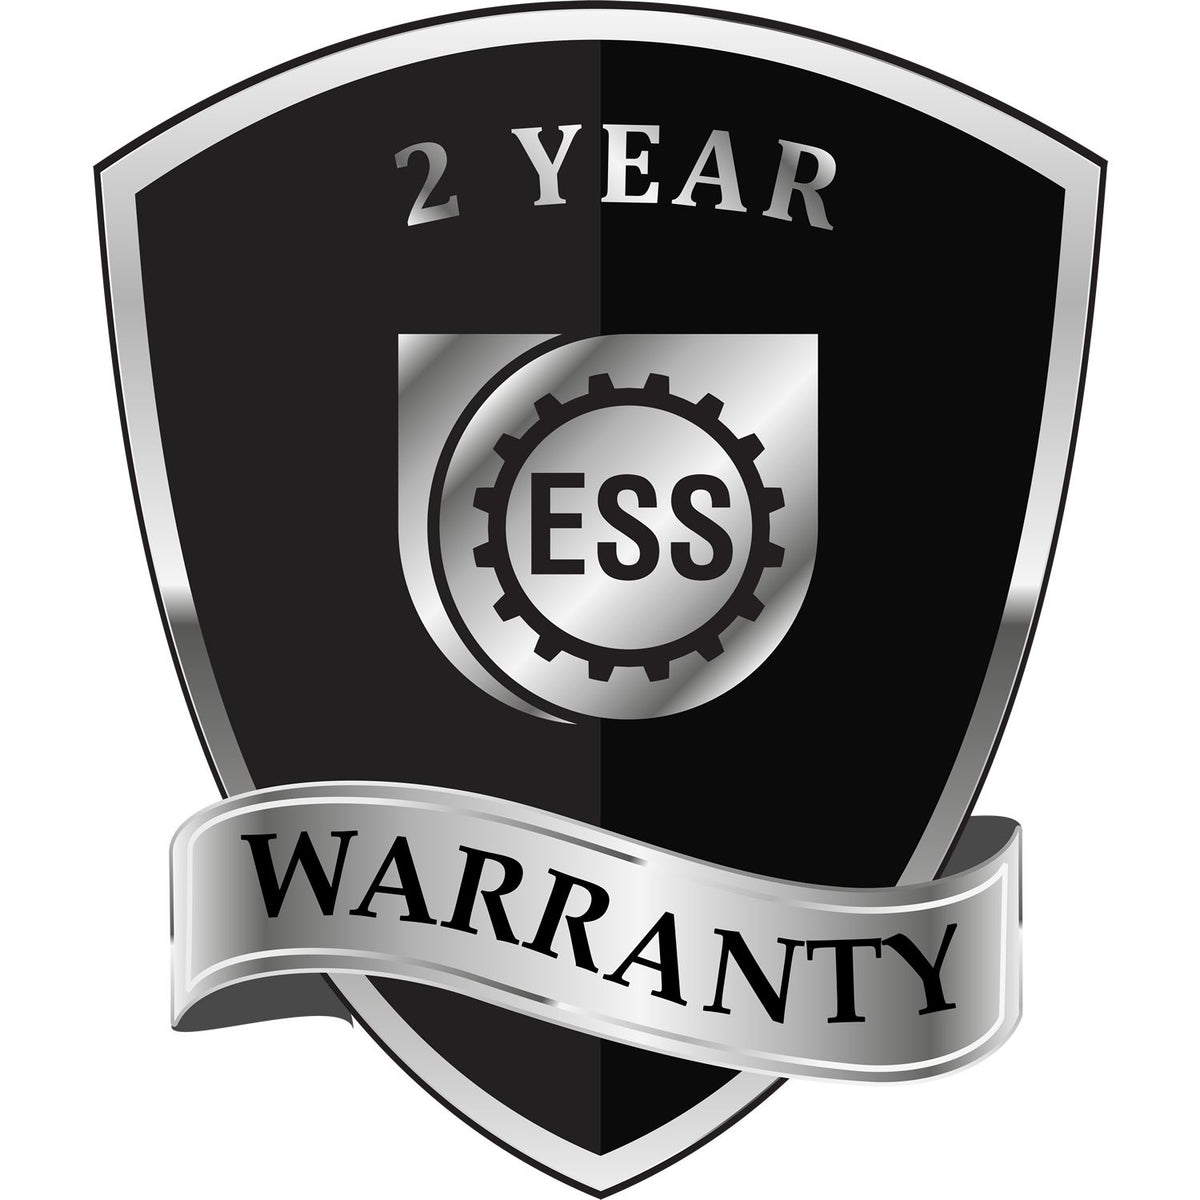 A badge or emblem showing a warranty icon for the Heavy Duty Cast Iron New Mexico Architect Embosser